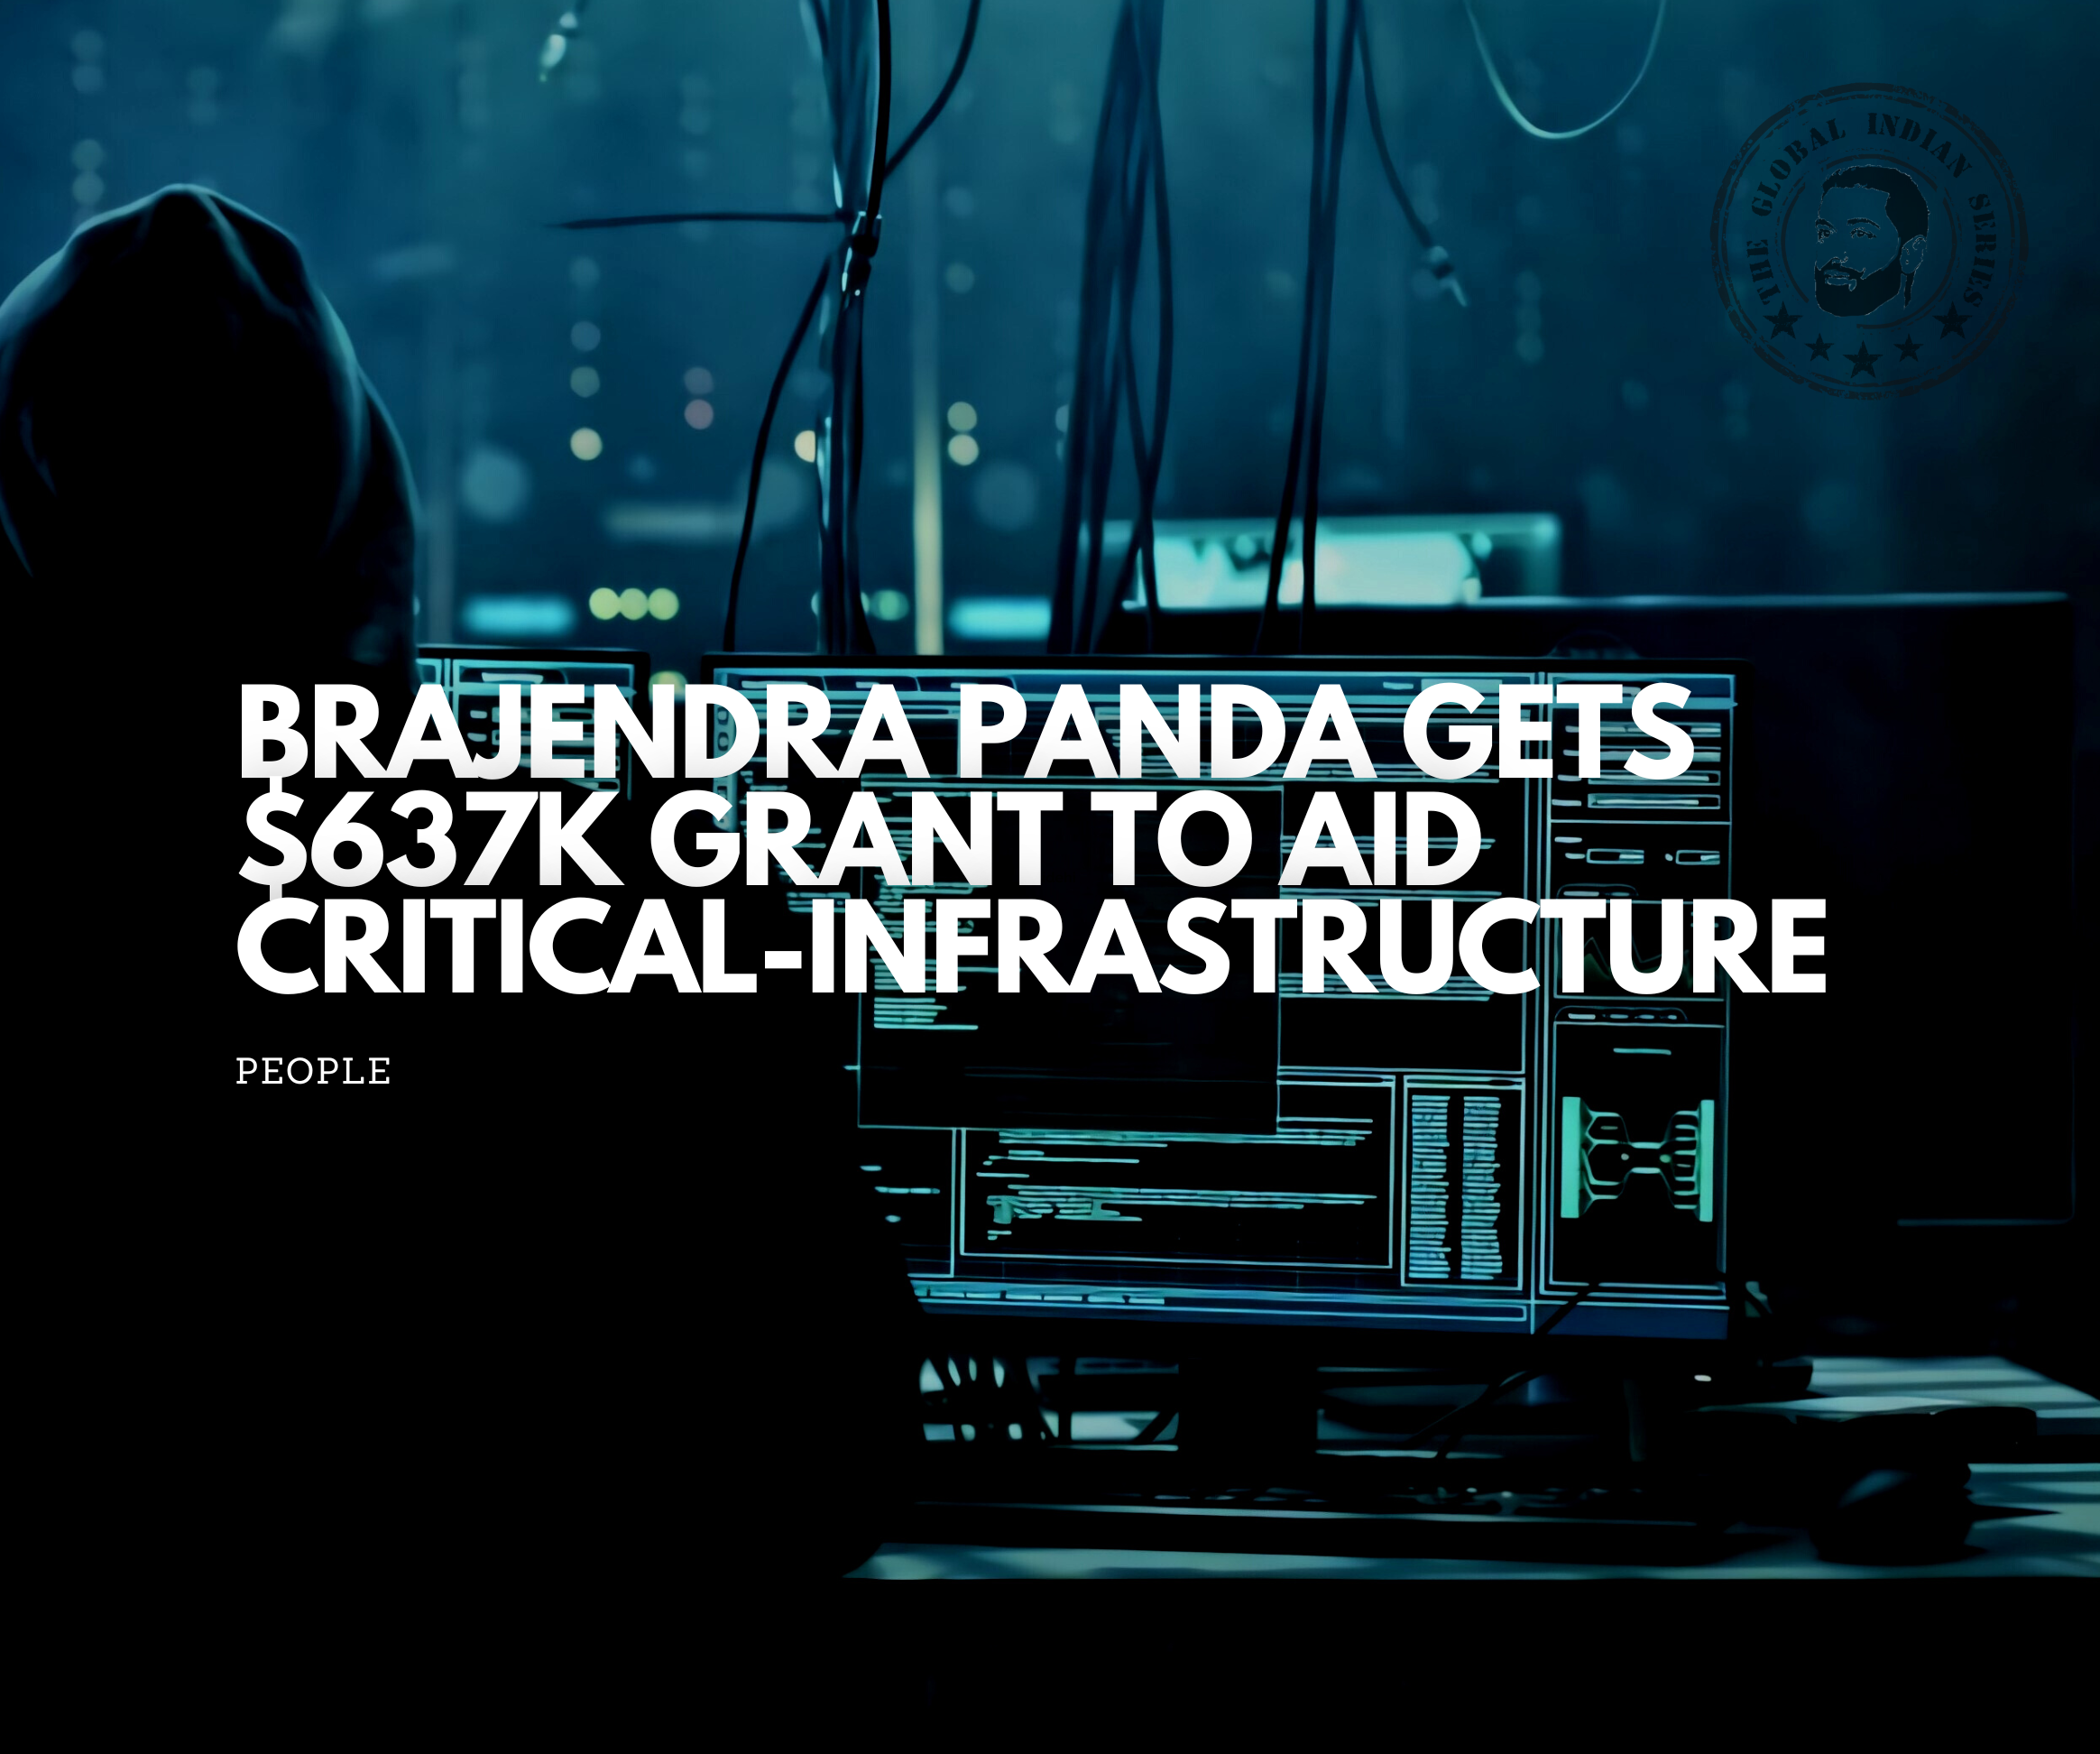 Brajendra Panda Gets $637K Grant To Aid Critical-Infrastructure, get know how this professor get his break in Cyber Security.